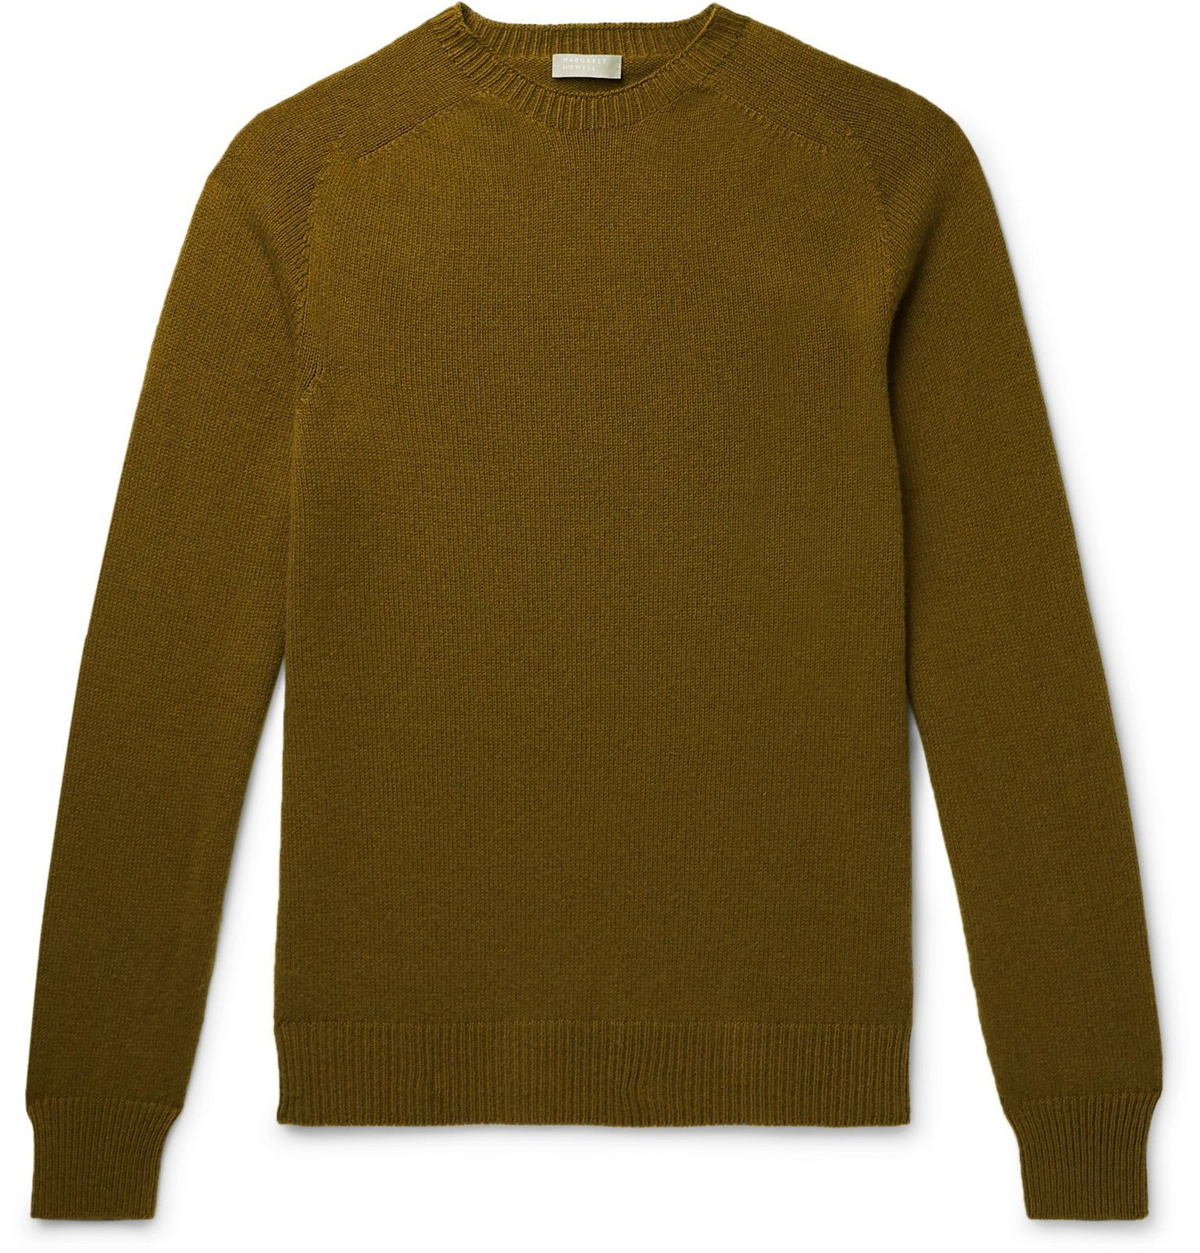 Margaret Howell - Cotton and Cashmere-Blend Sweater - Green